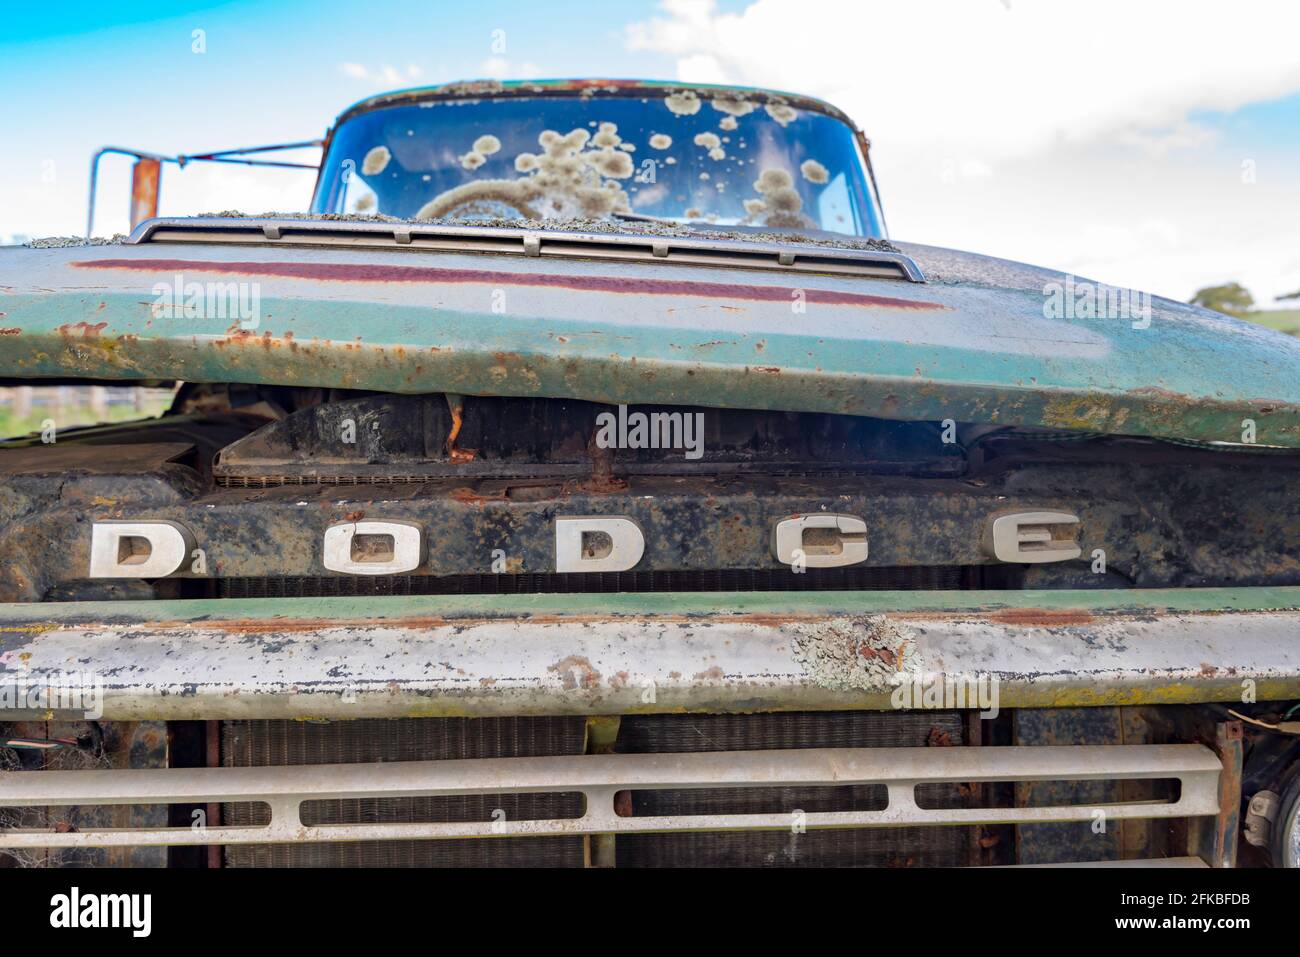 A front-on closeup of an ageing and rusted Dodge truck that has been out in the weather for many years in Australia Stock Photo